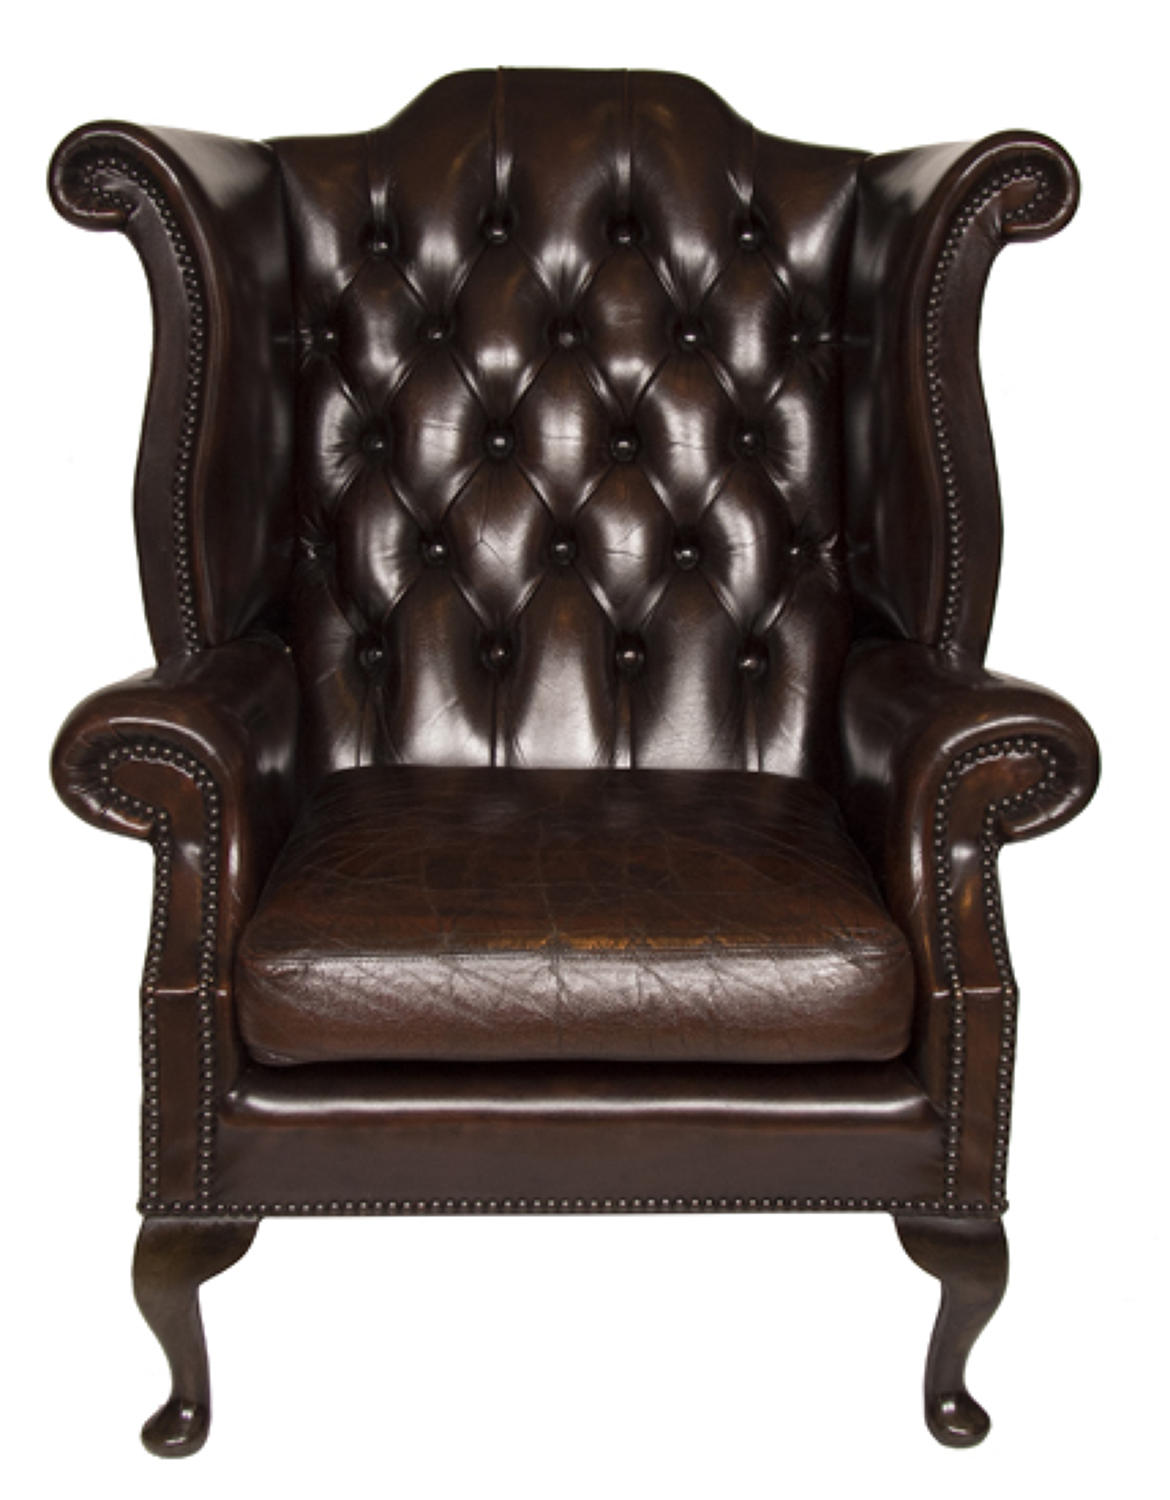 Vintage leather wing chair